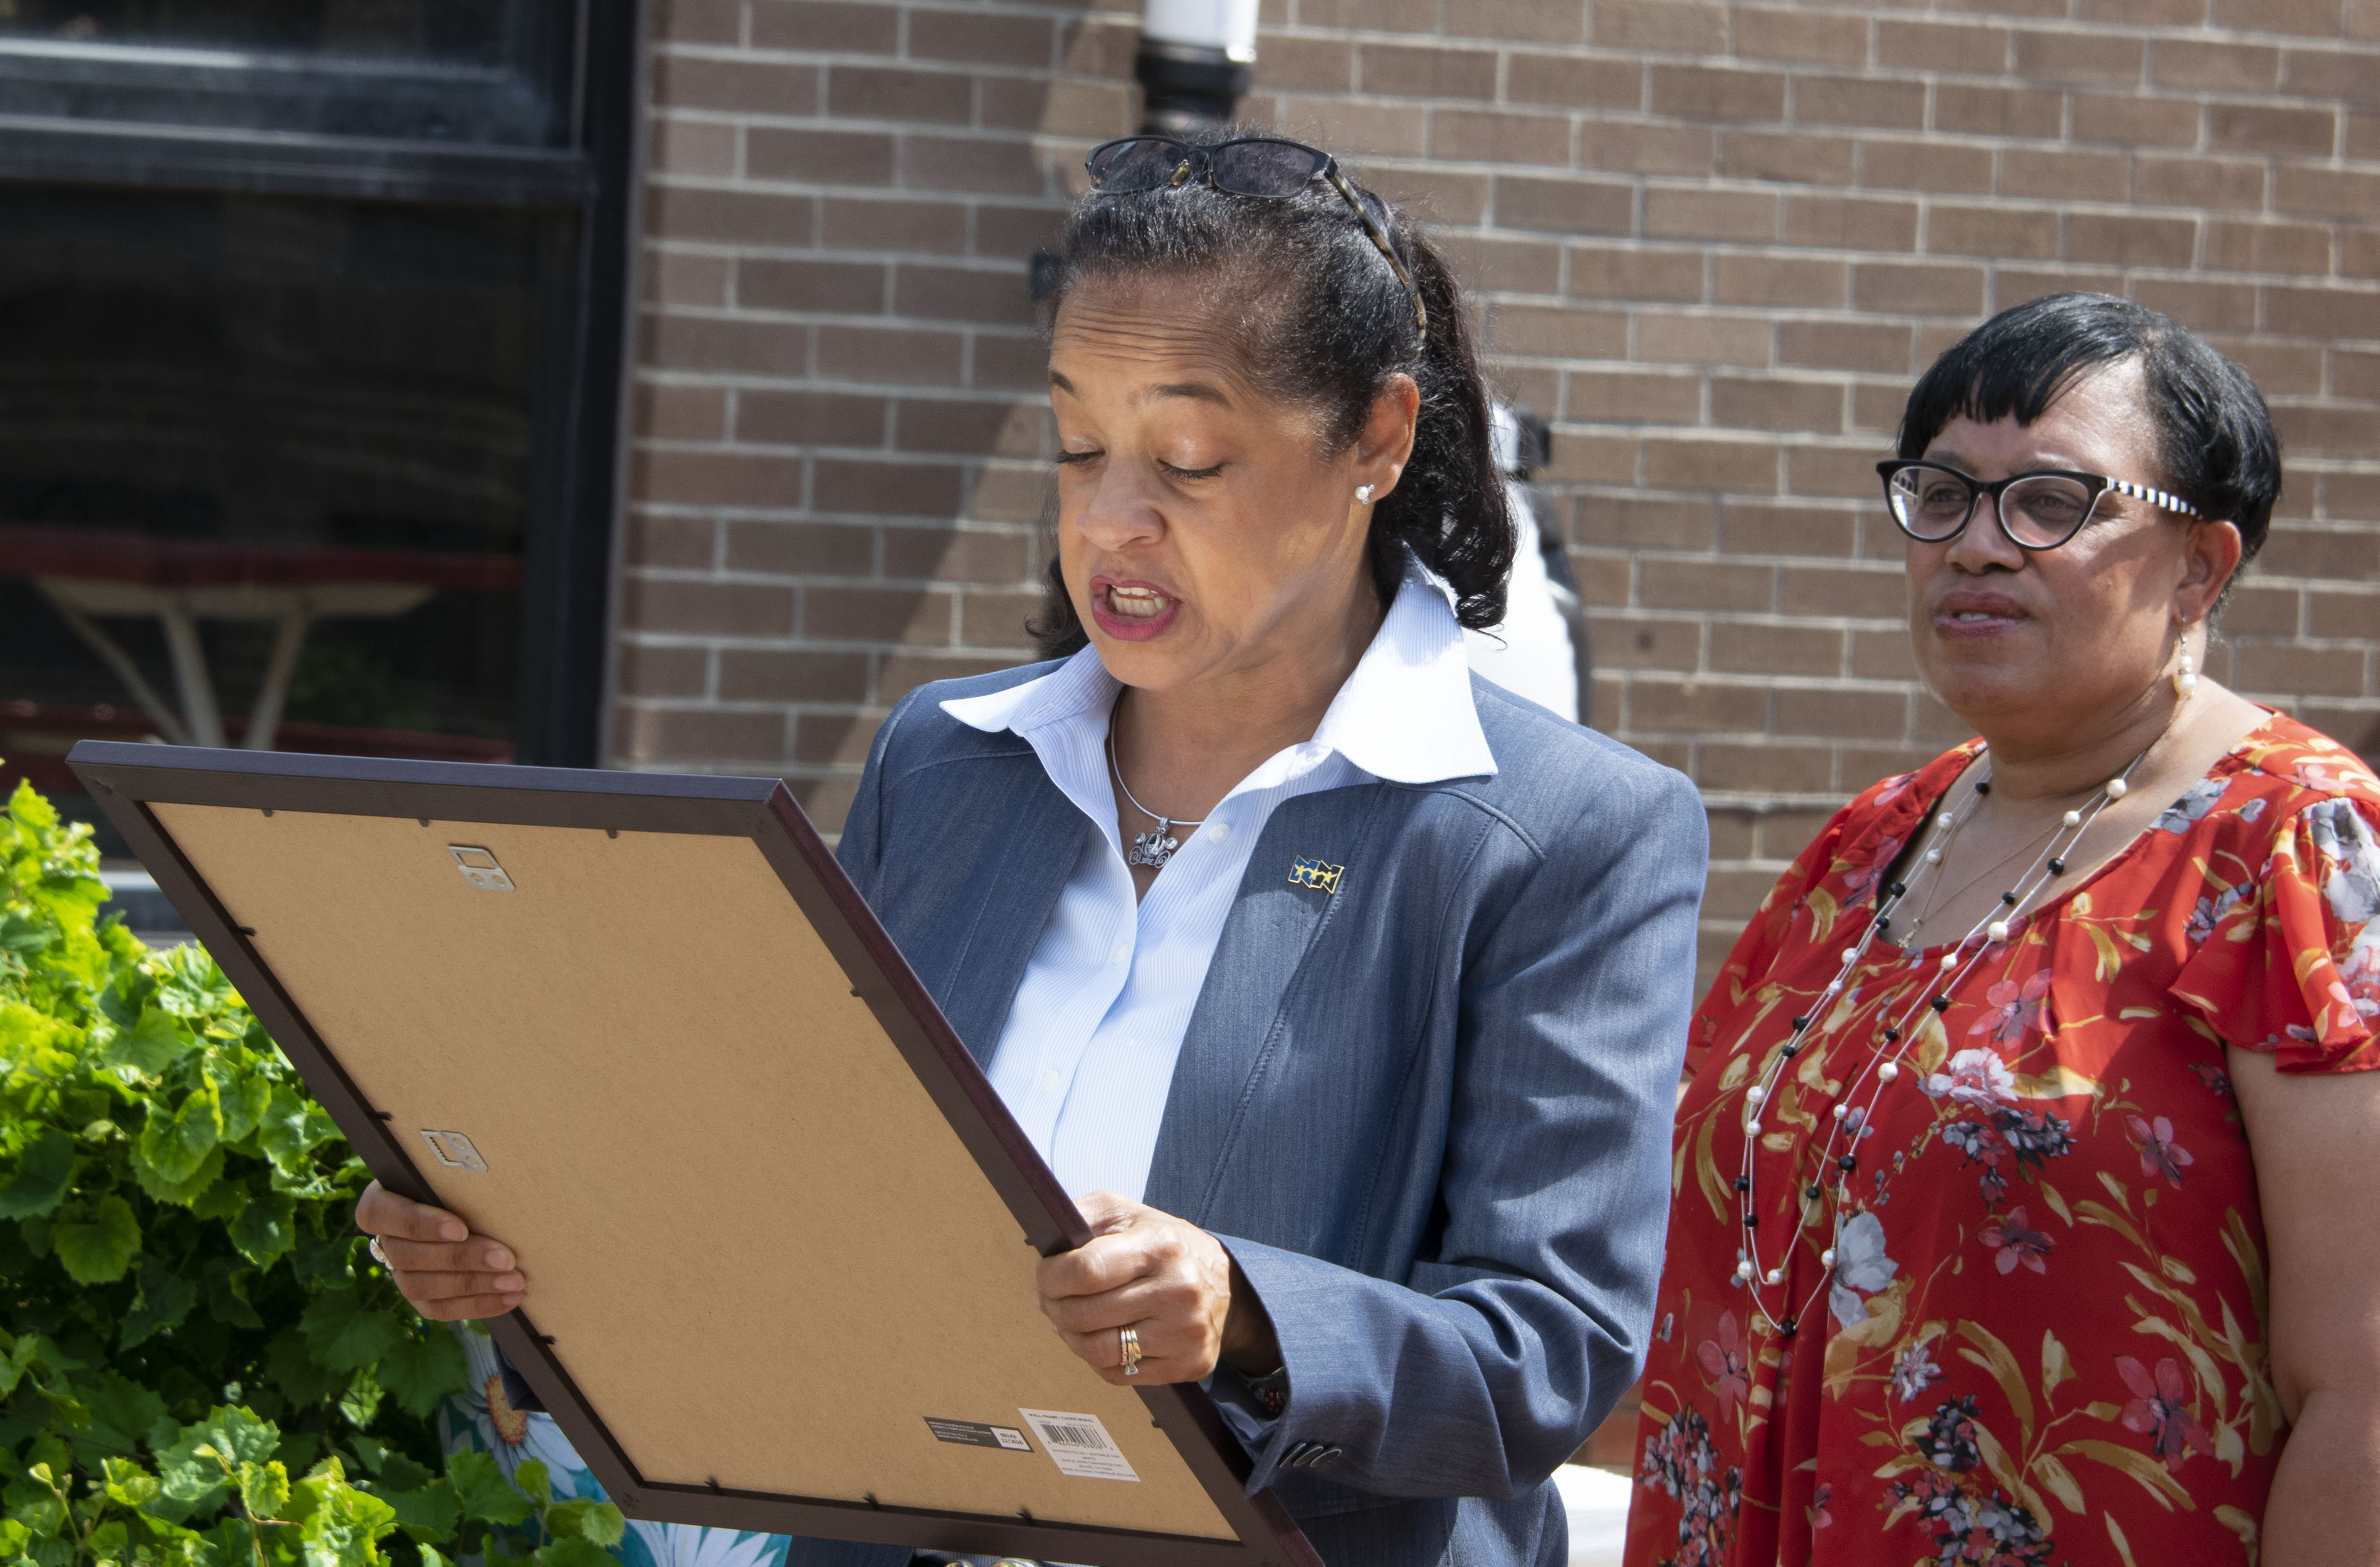 Newport News School Board Vice Chair Lisa Surles-Law read the official proclamation while Dr. Melody Camm, Palmer Elementary principal, looked on.